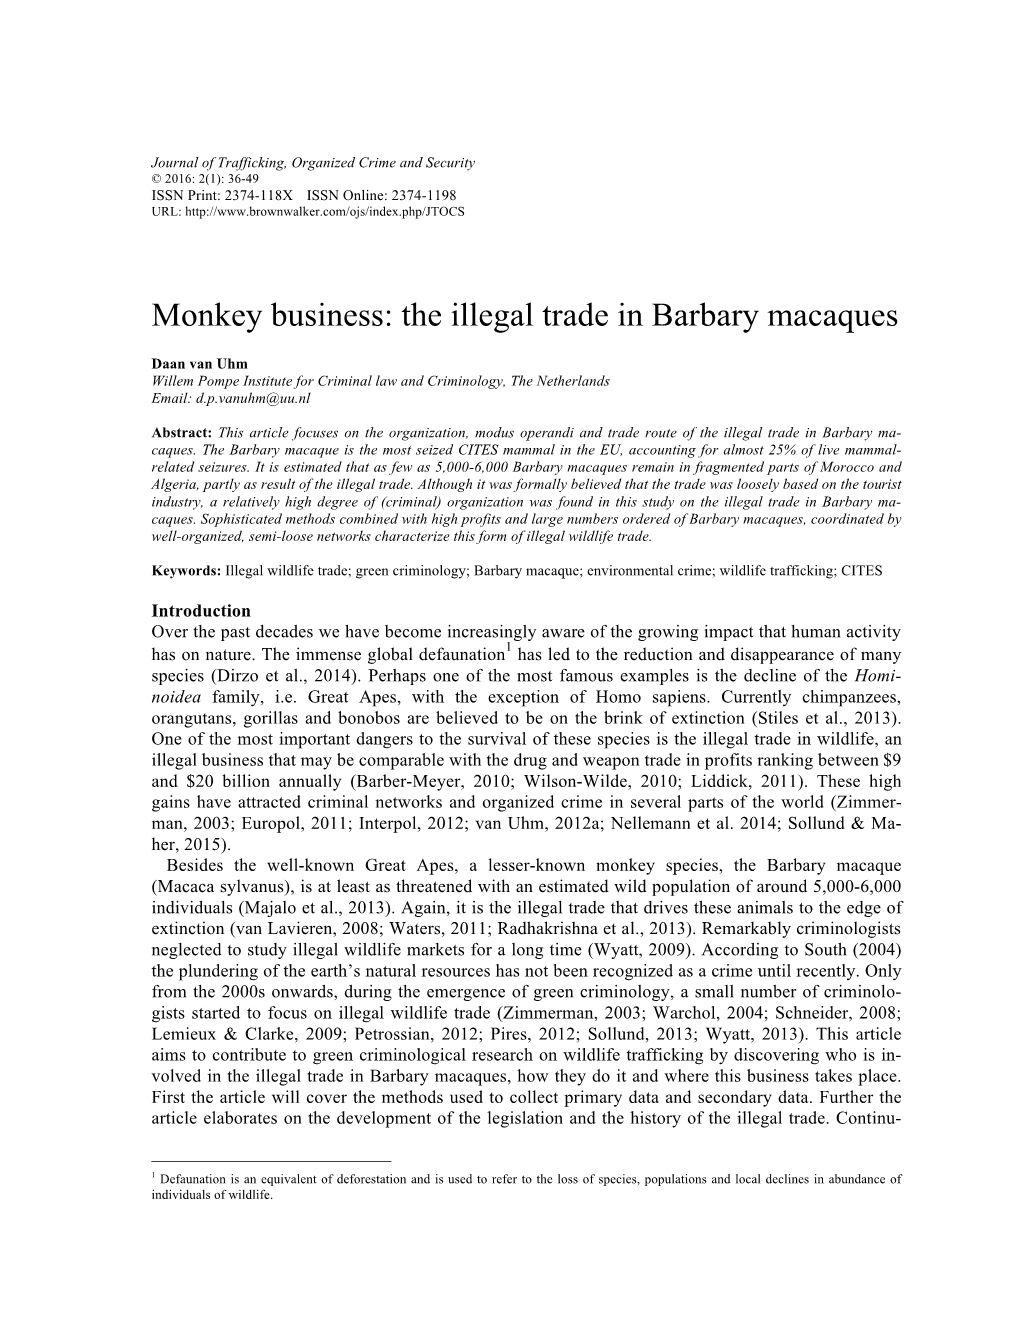 Monkey Business: the Illegal Trade in Barbary Macaques